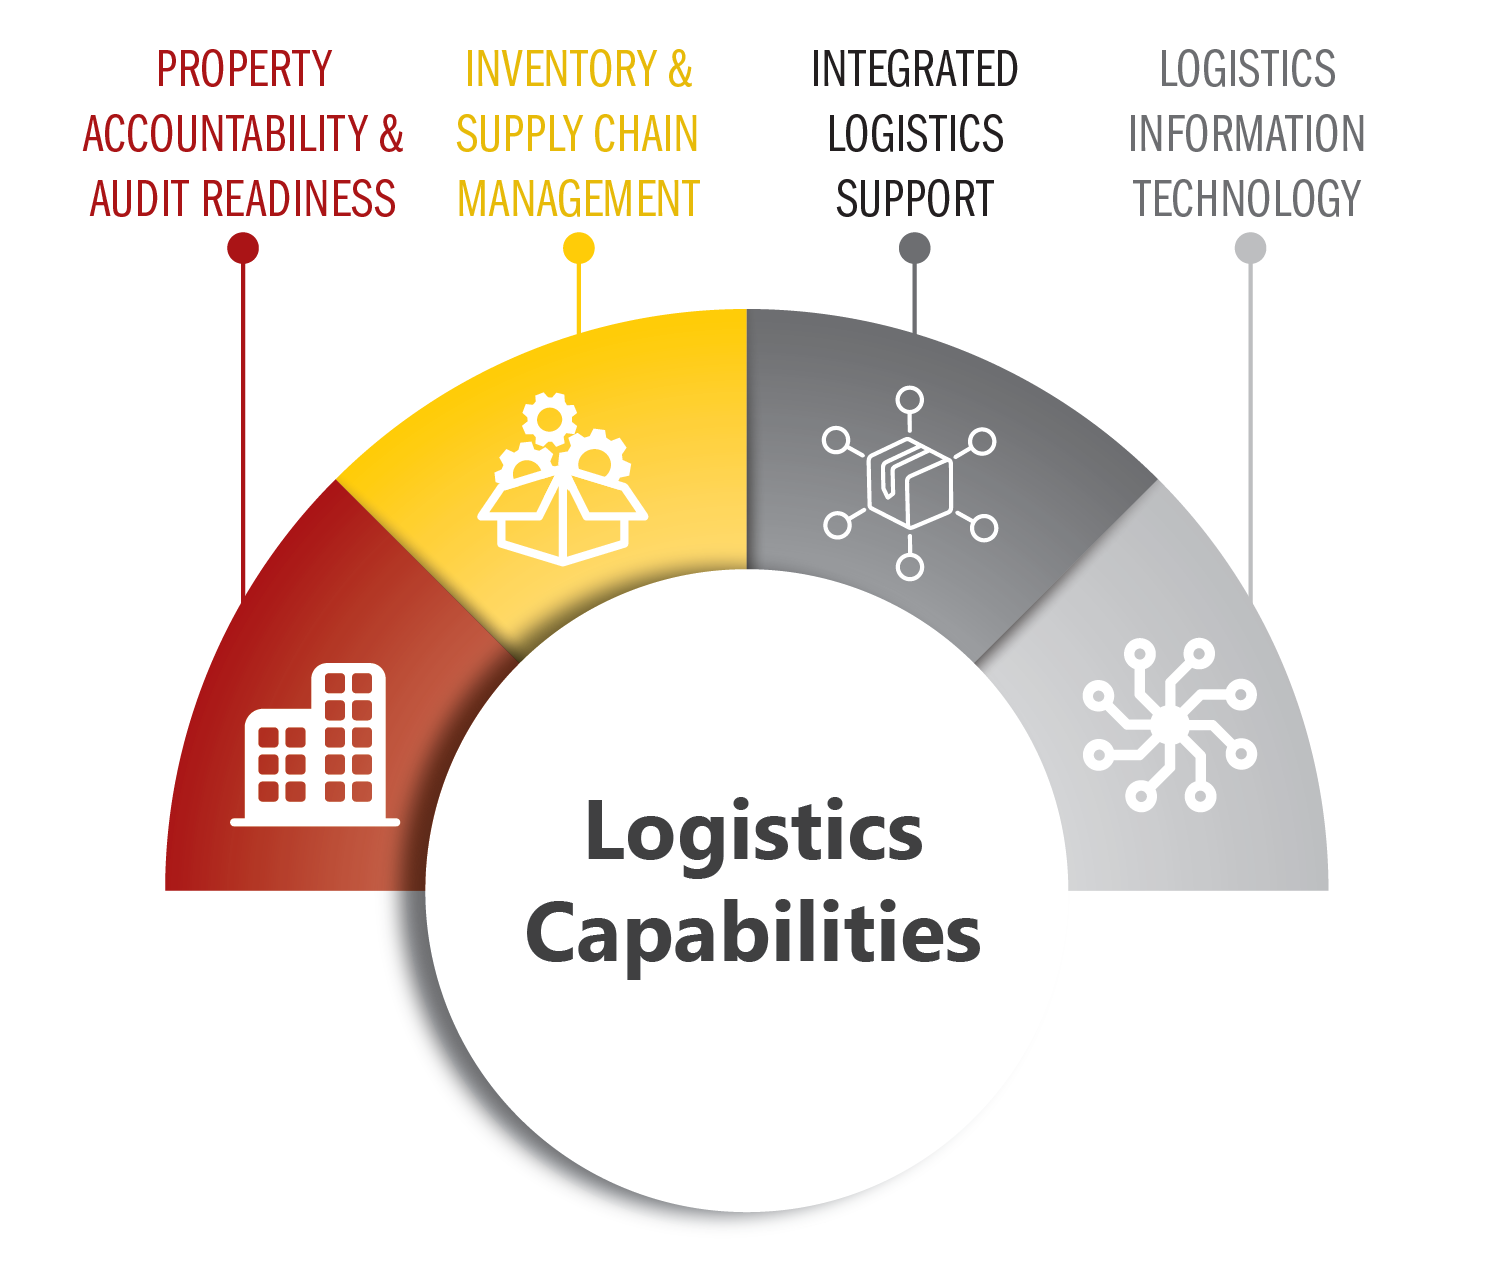 Logistics capabilities graphic for the hotspot feature, which shows icons for Property Accountability & Audit Readiness (red color), Inventory & Supply Chain Management (yellow color), Integrated Logistics Support (dark grey color), and Logistics Information Technology (light grey color).